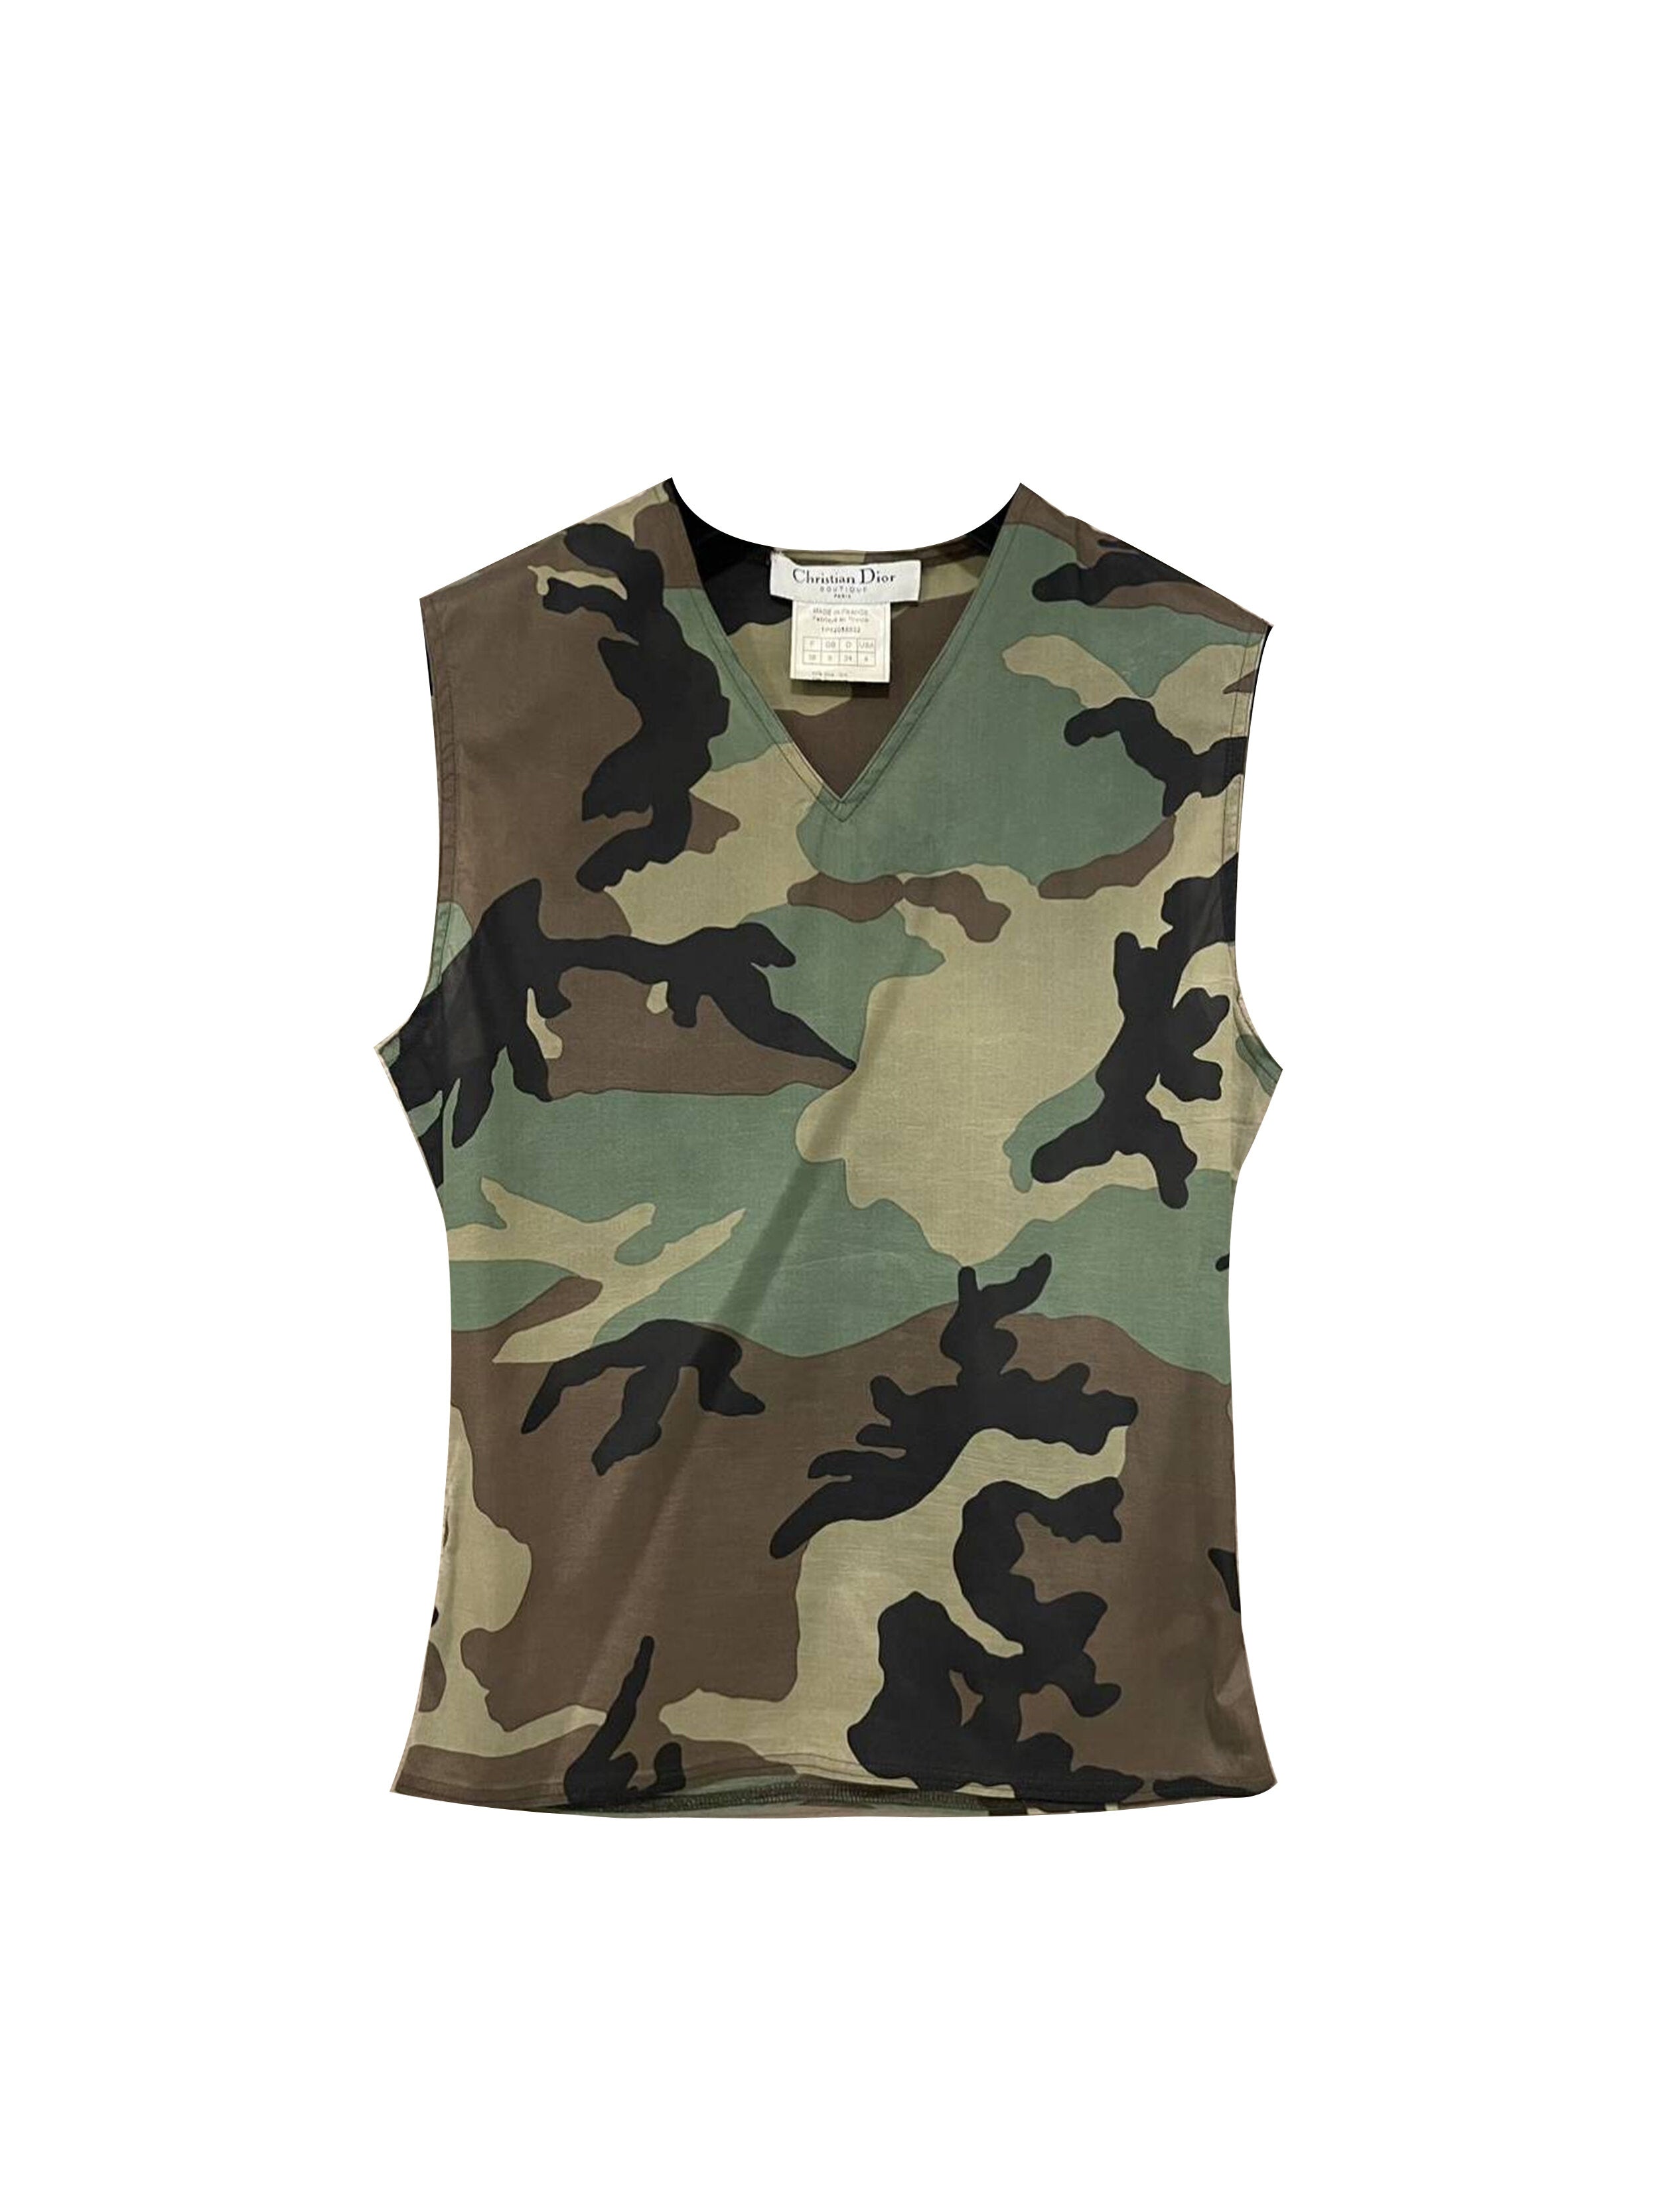 Christian Dior 2004 CAMOUFLAGE T-SHIRT-